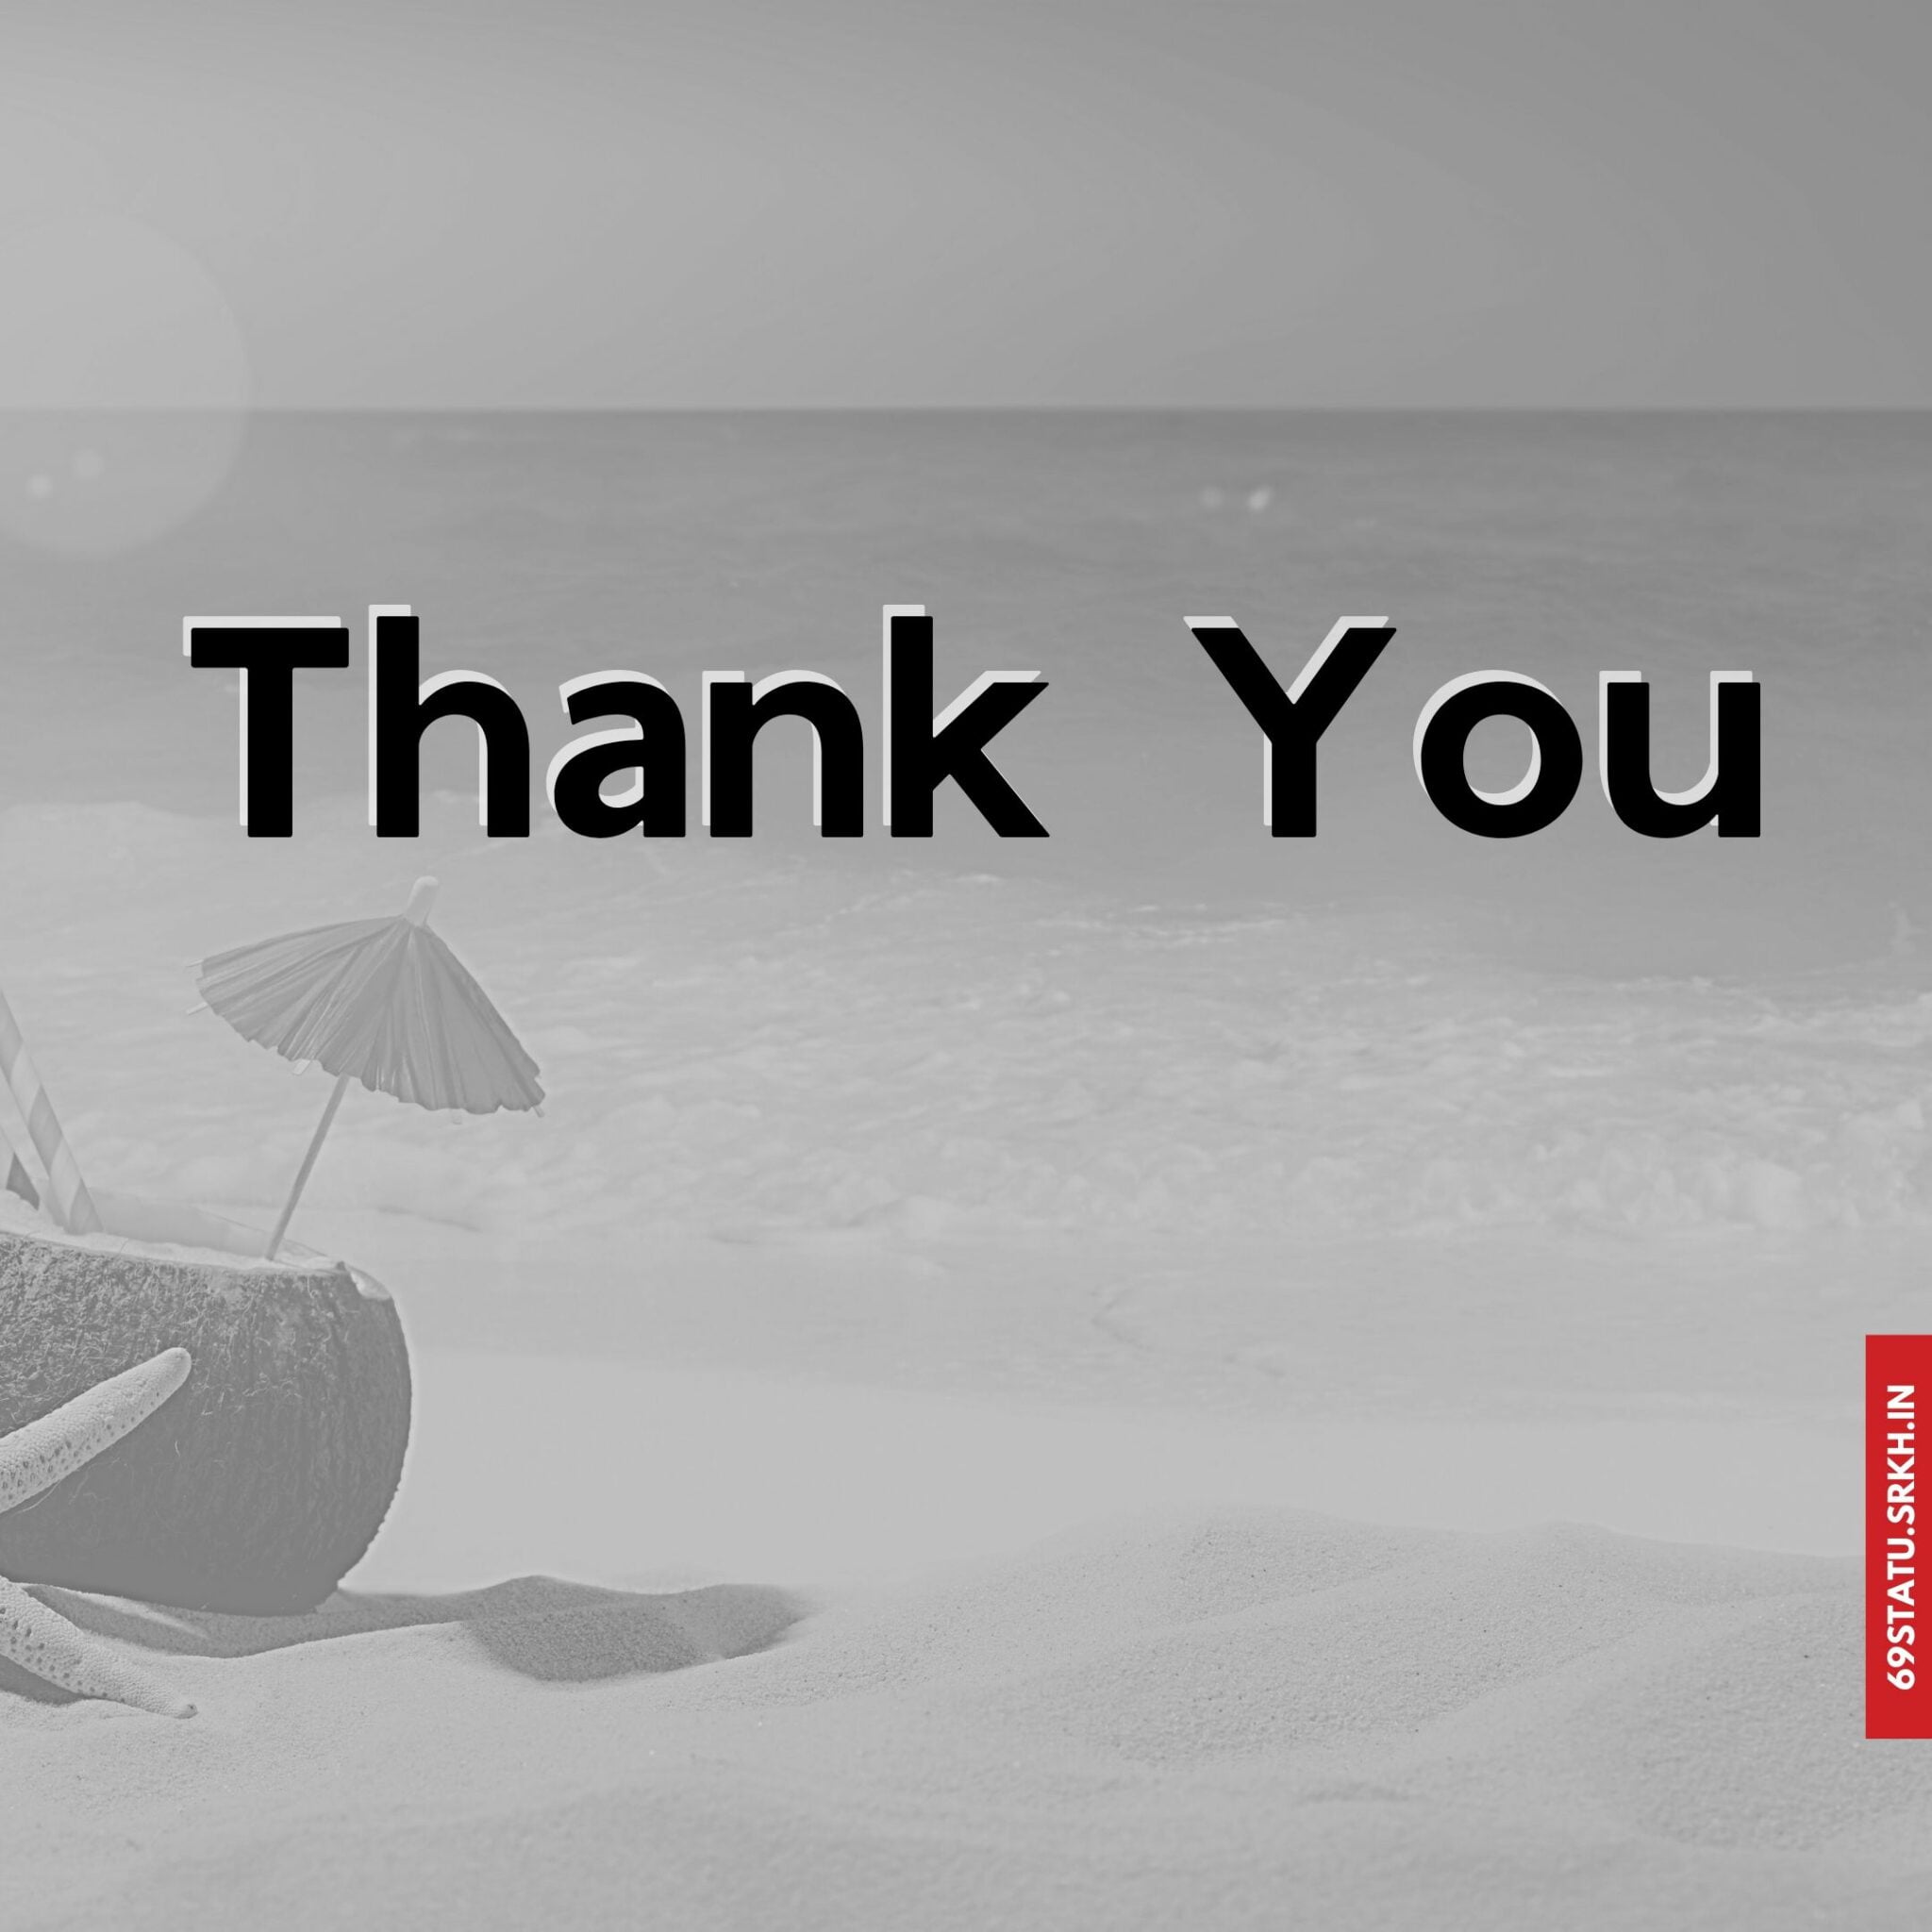 Thank You Images Black and White